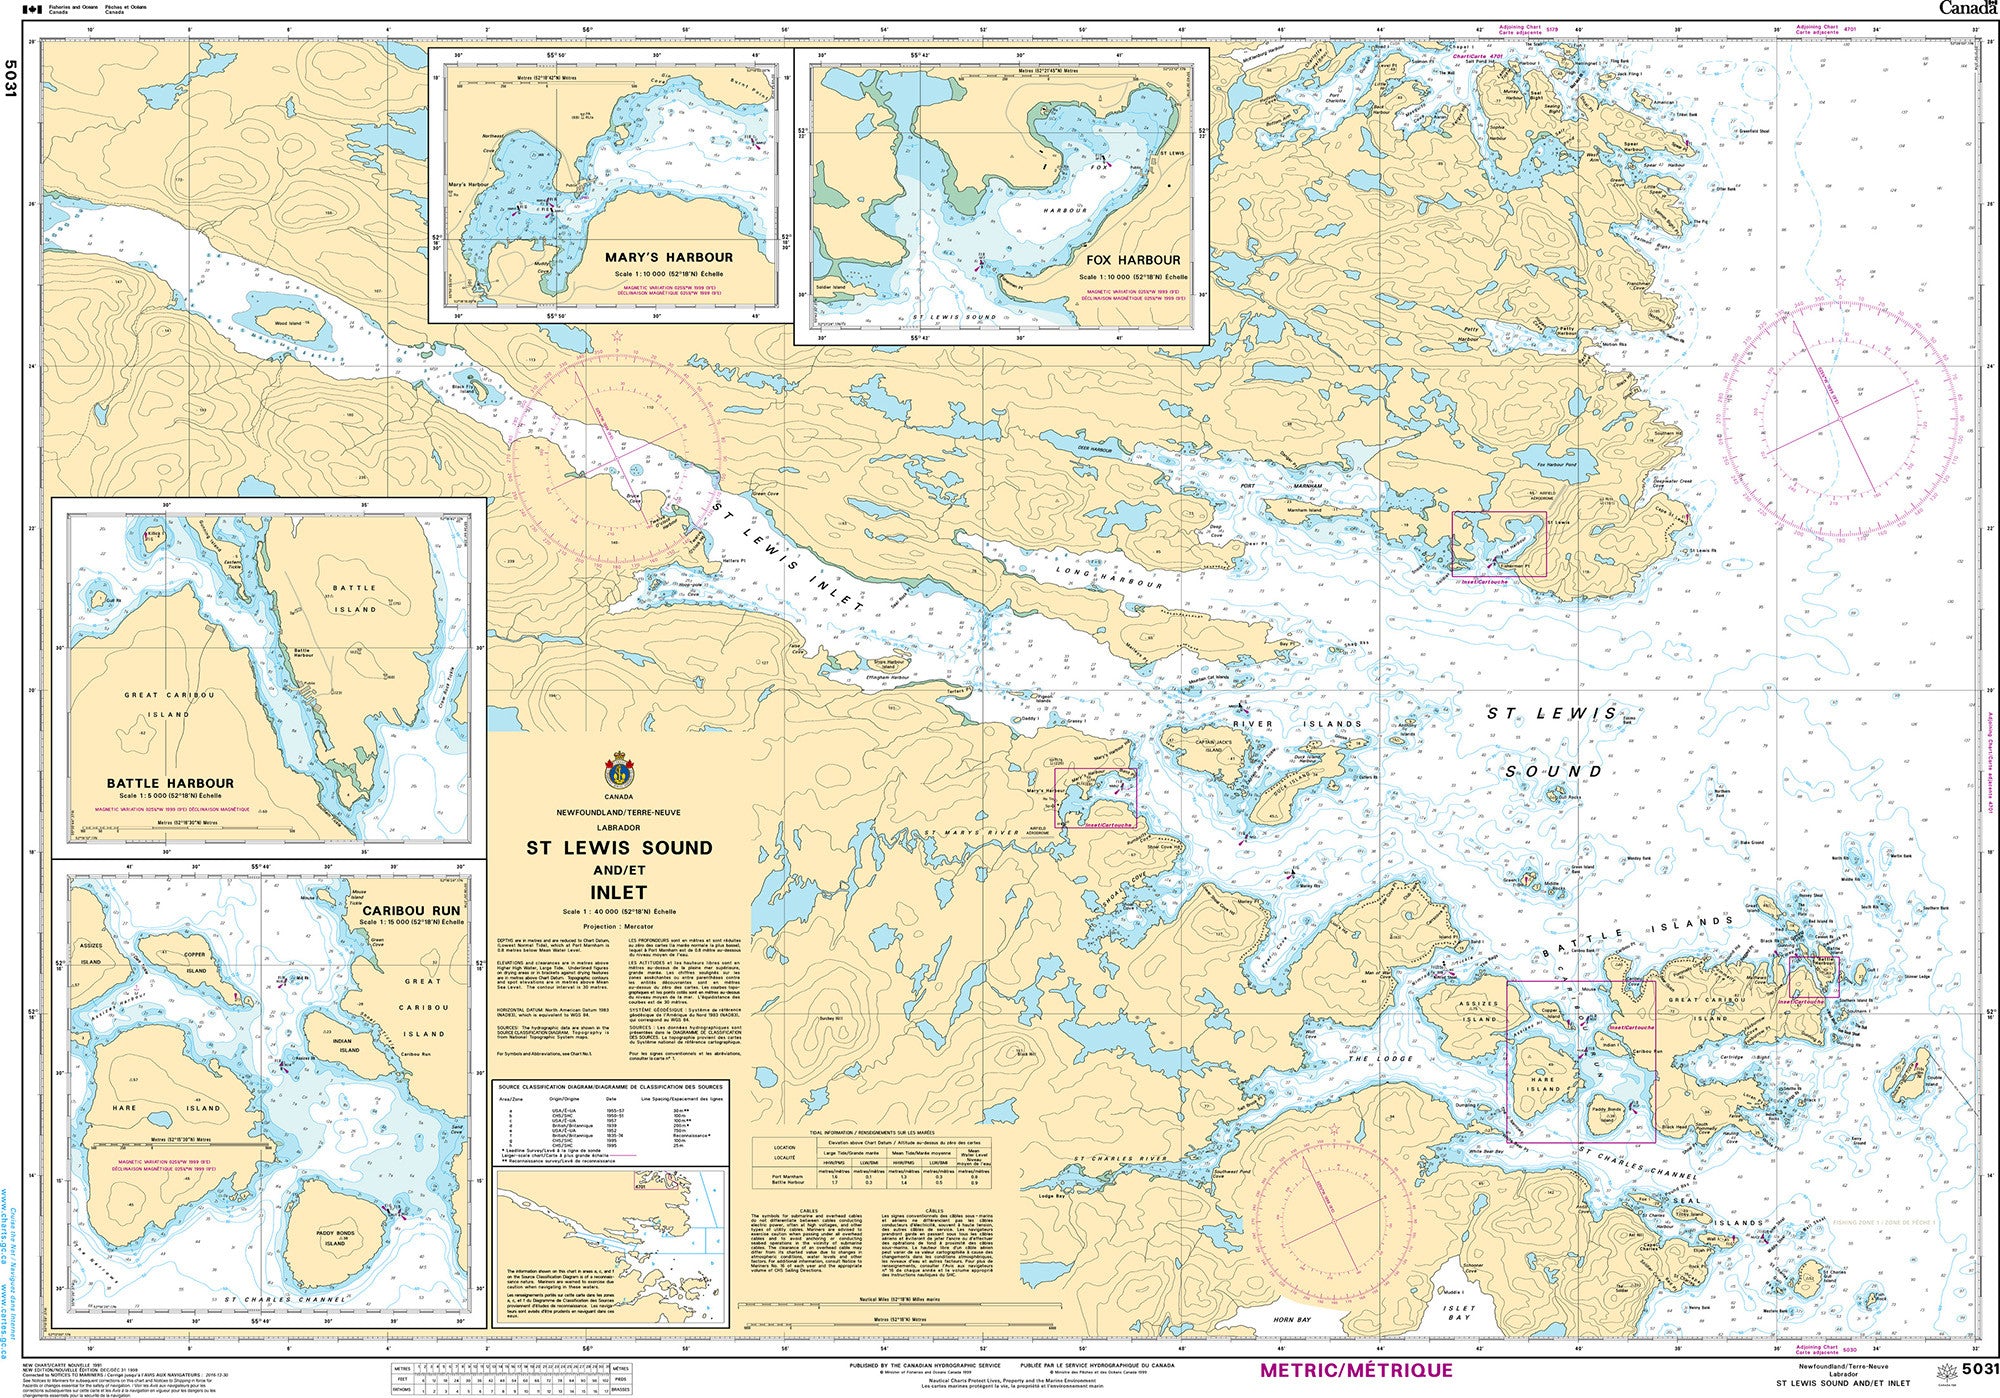 Canadian Hydrographic Service Nautical Chart CHS5031: St. Lewis Sound and/et Inlet